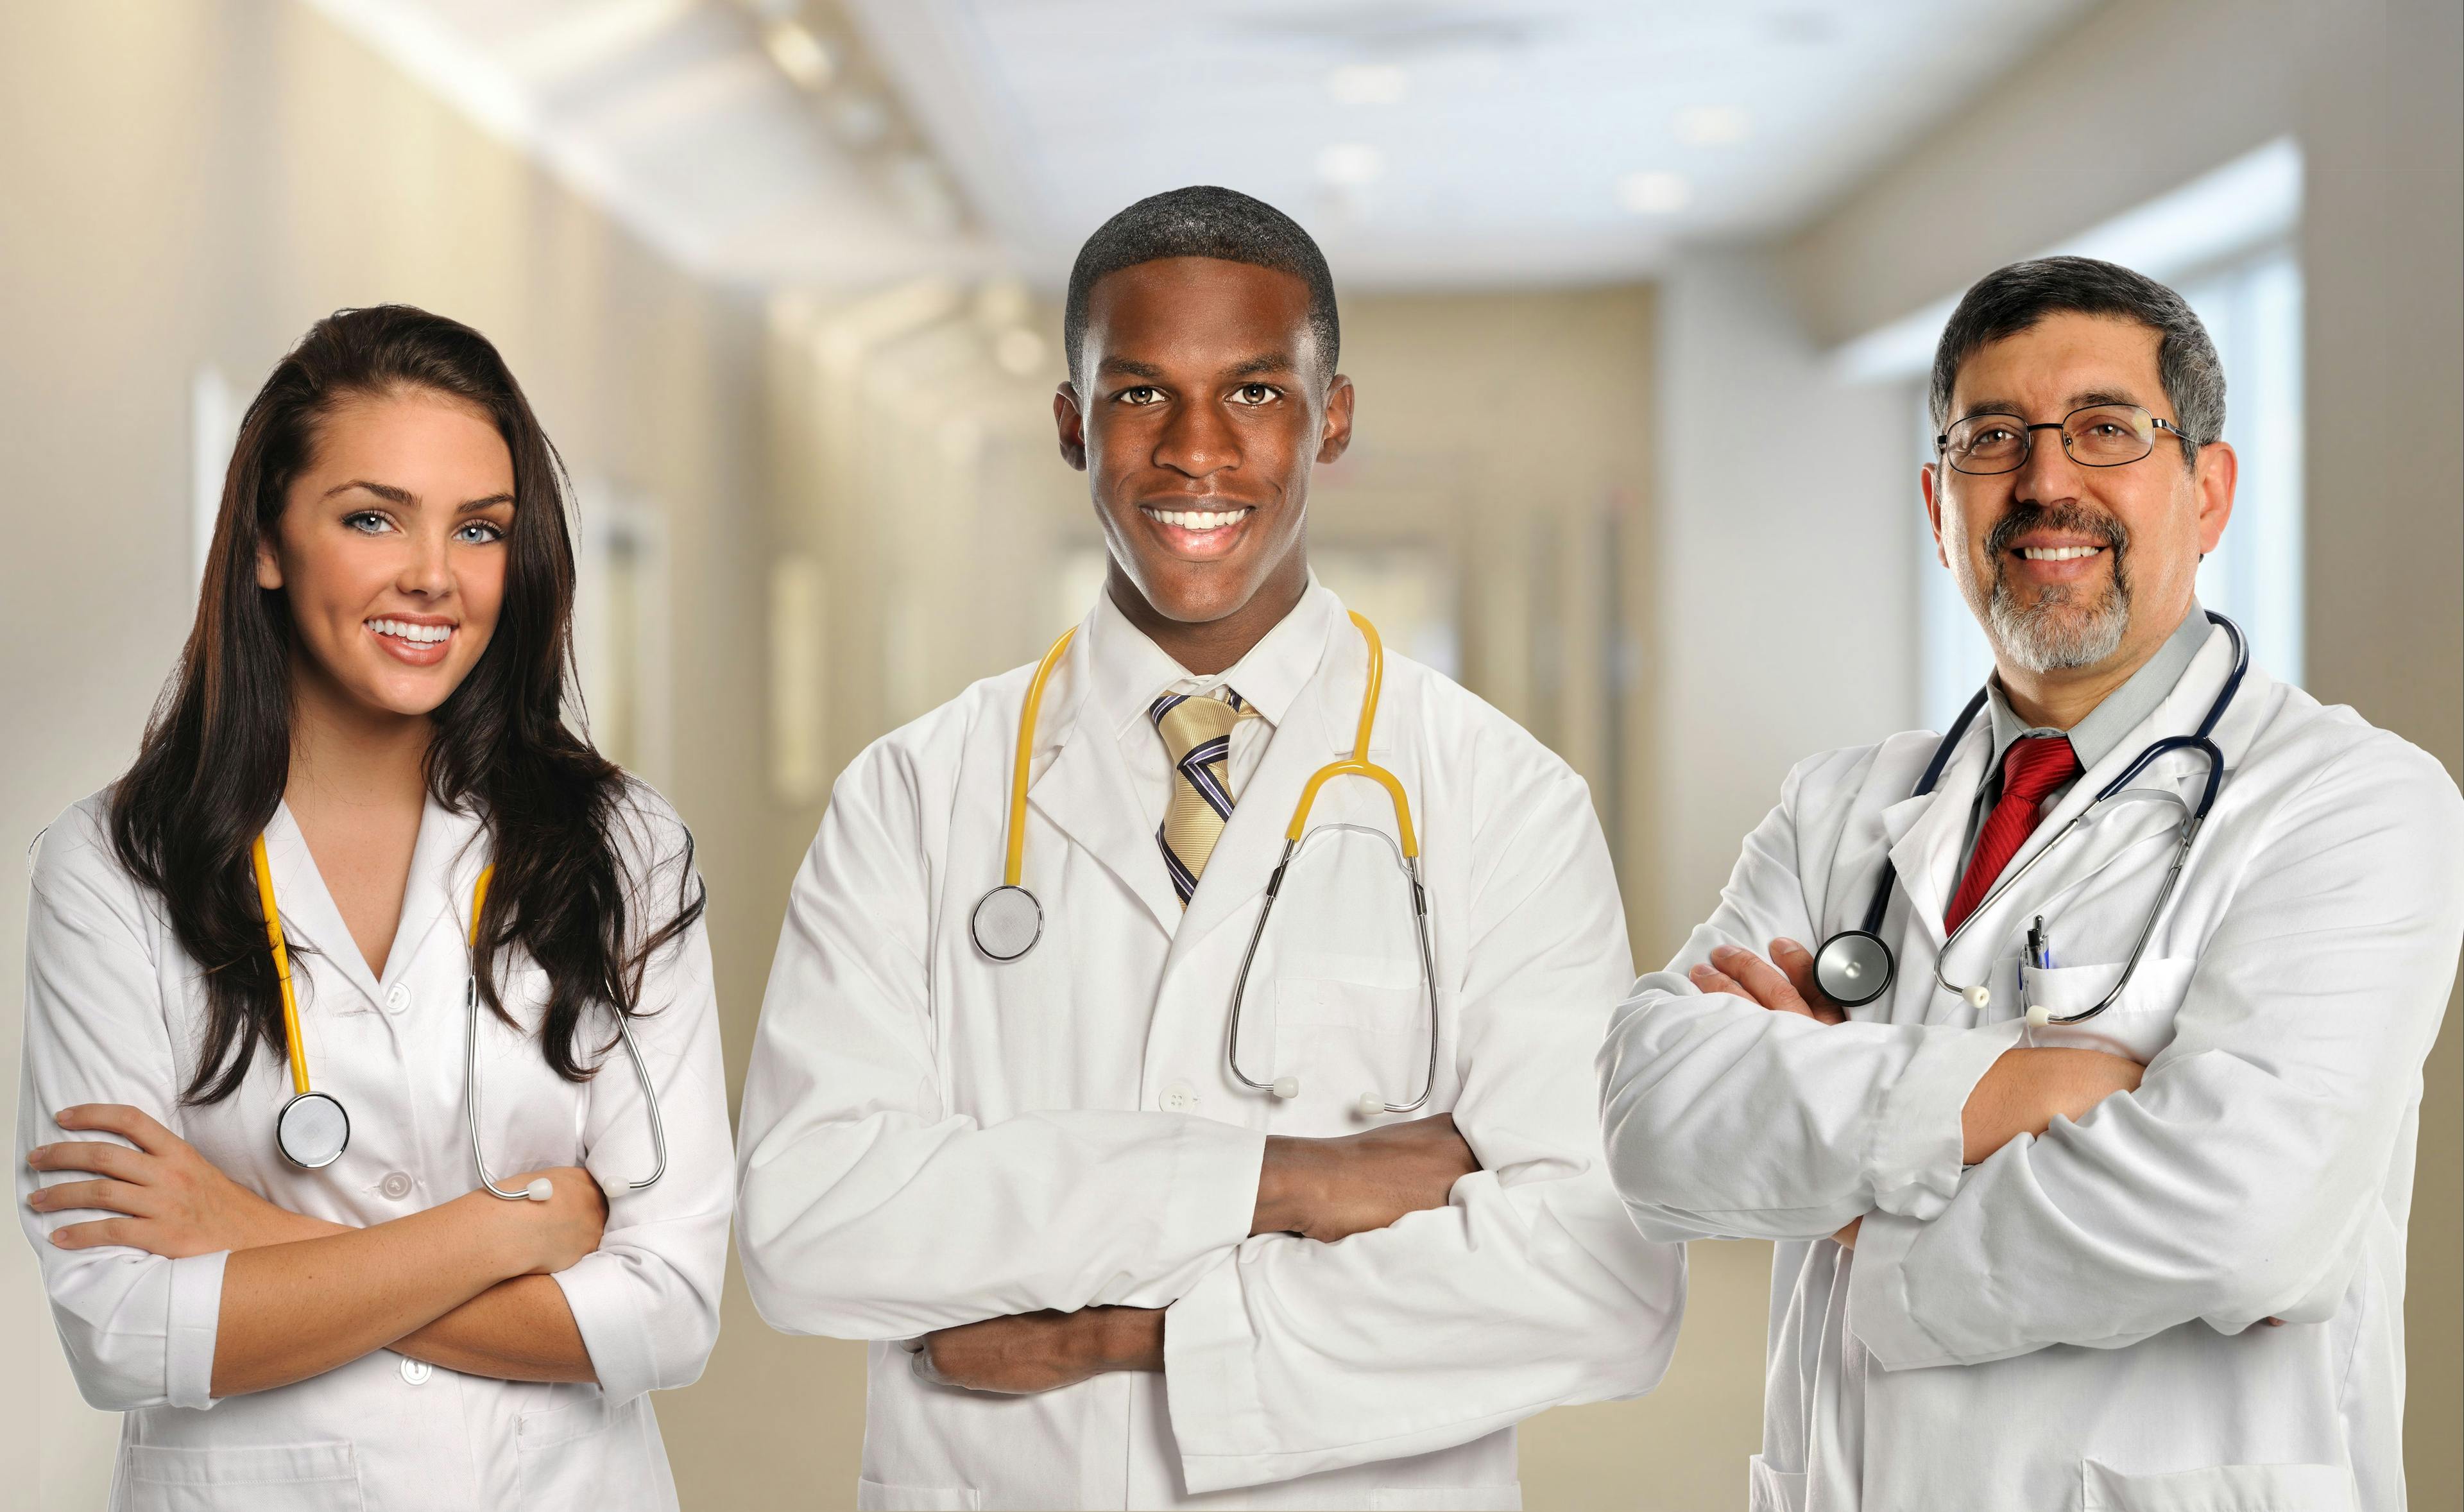 What do younger doctors want from their careers?